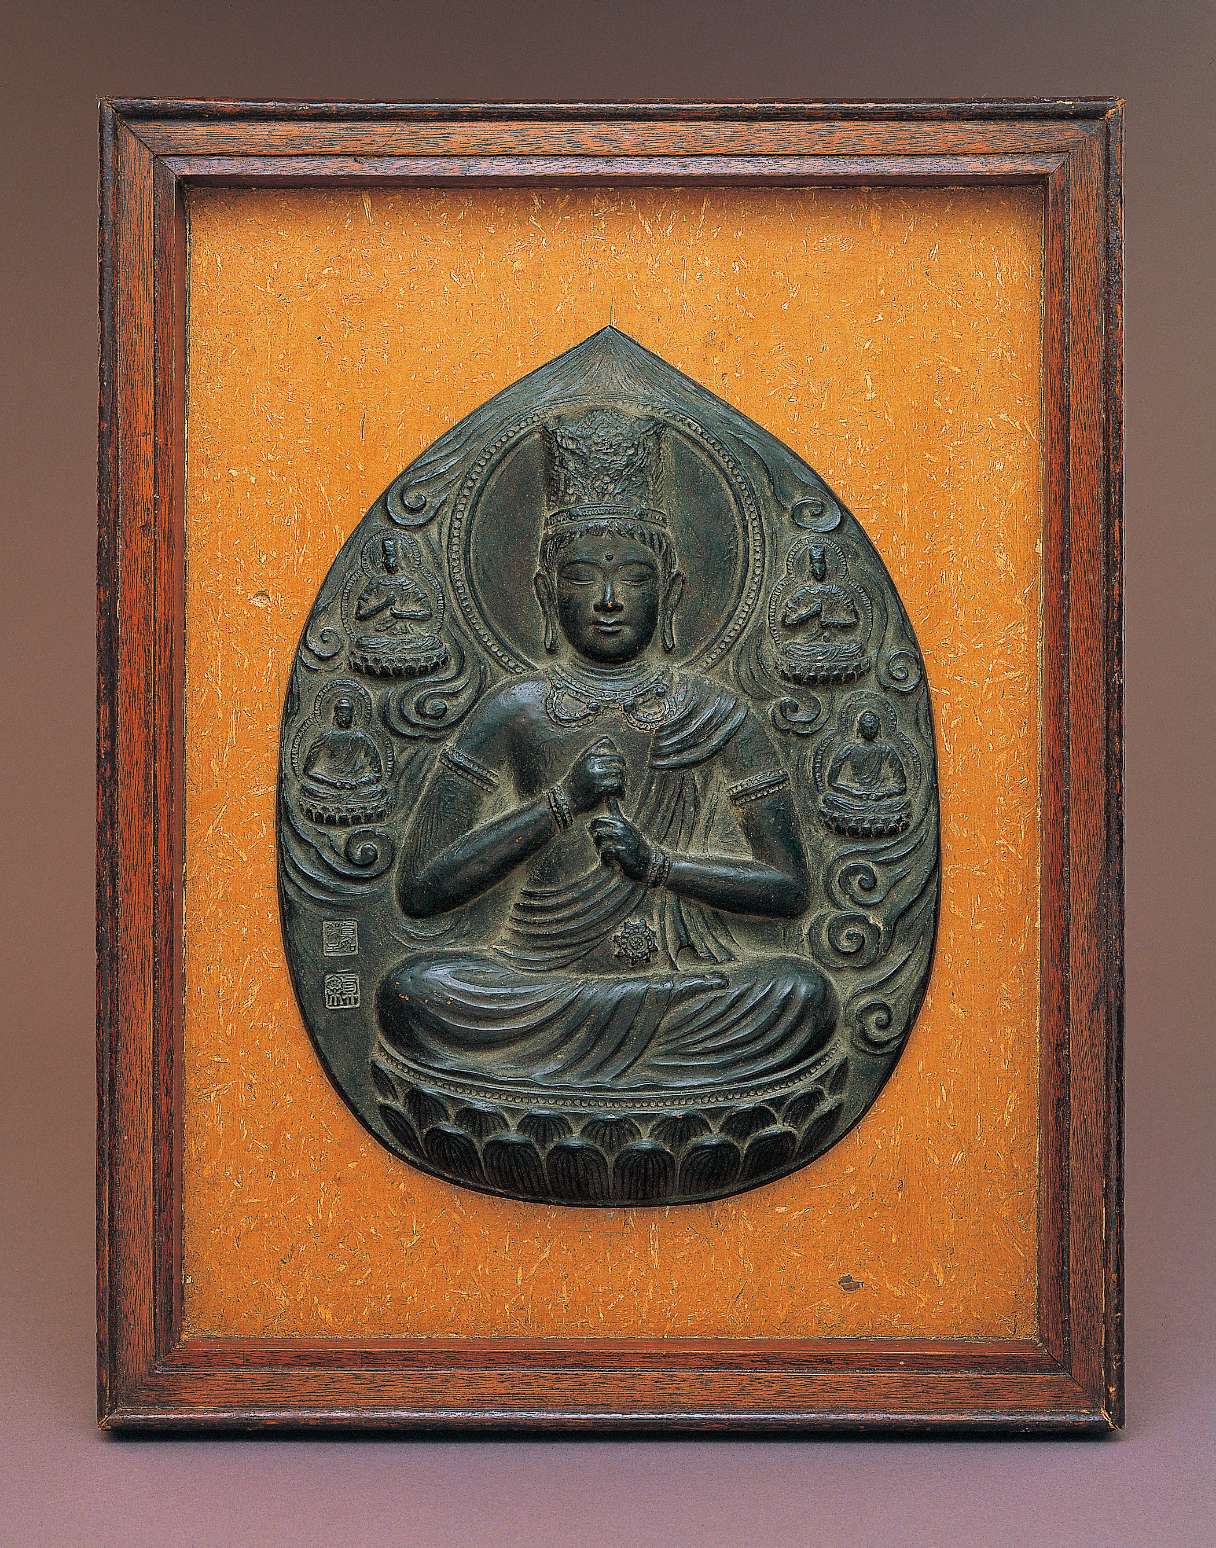 An upright almond-shaped metallic relief of a buddha wearing a tall crown sitting cross-legged, grasping his upturned left index finger with his right hand, surrounded by clouds and four smaller buddhas.